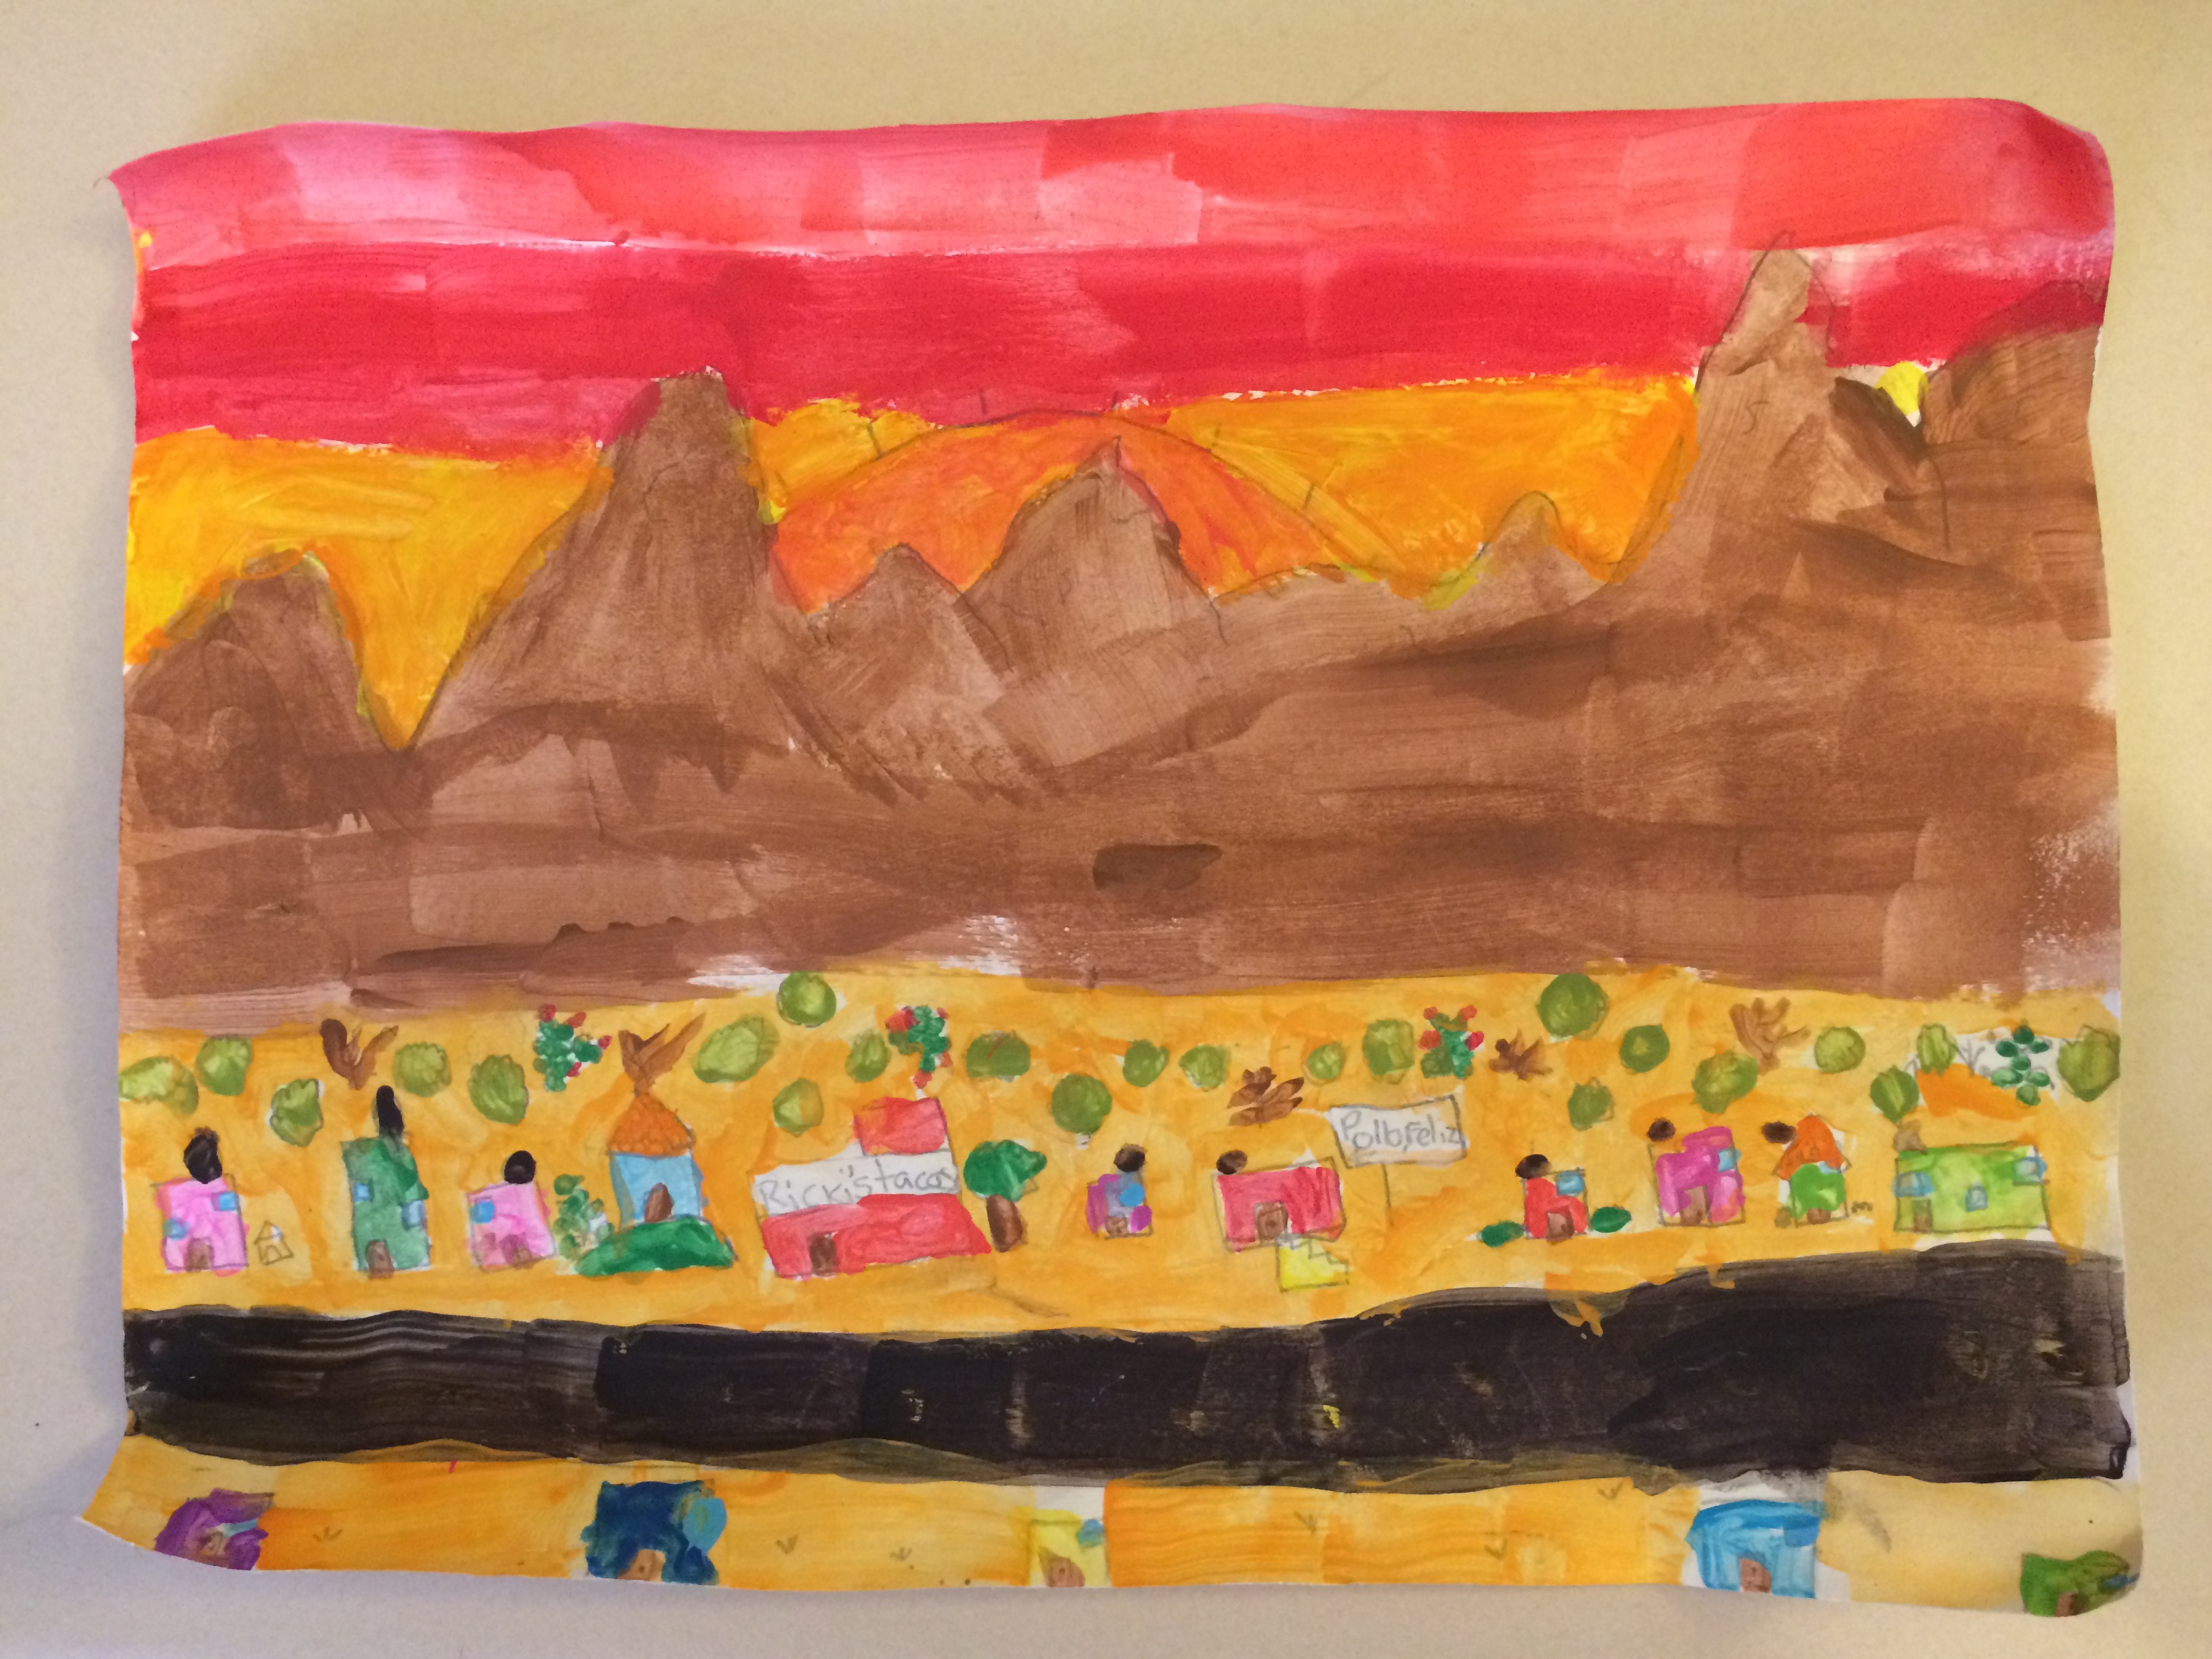 A painting done by Elayne showing sunset behind the mountains of Chihuahua, with the town and highway in the distant foreground.